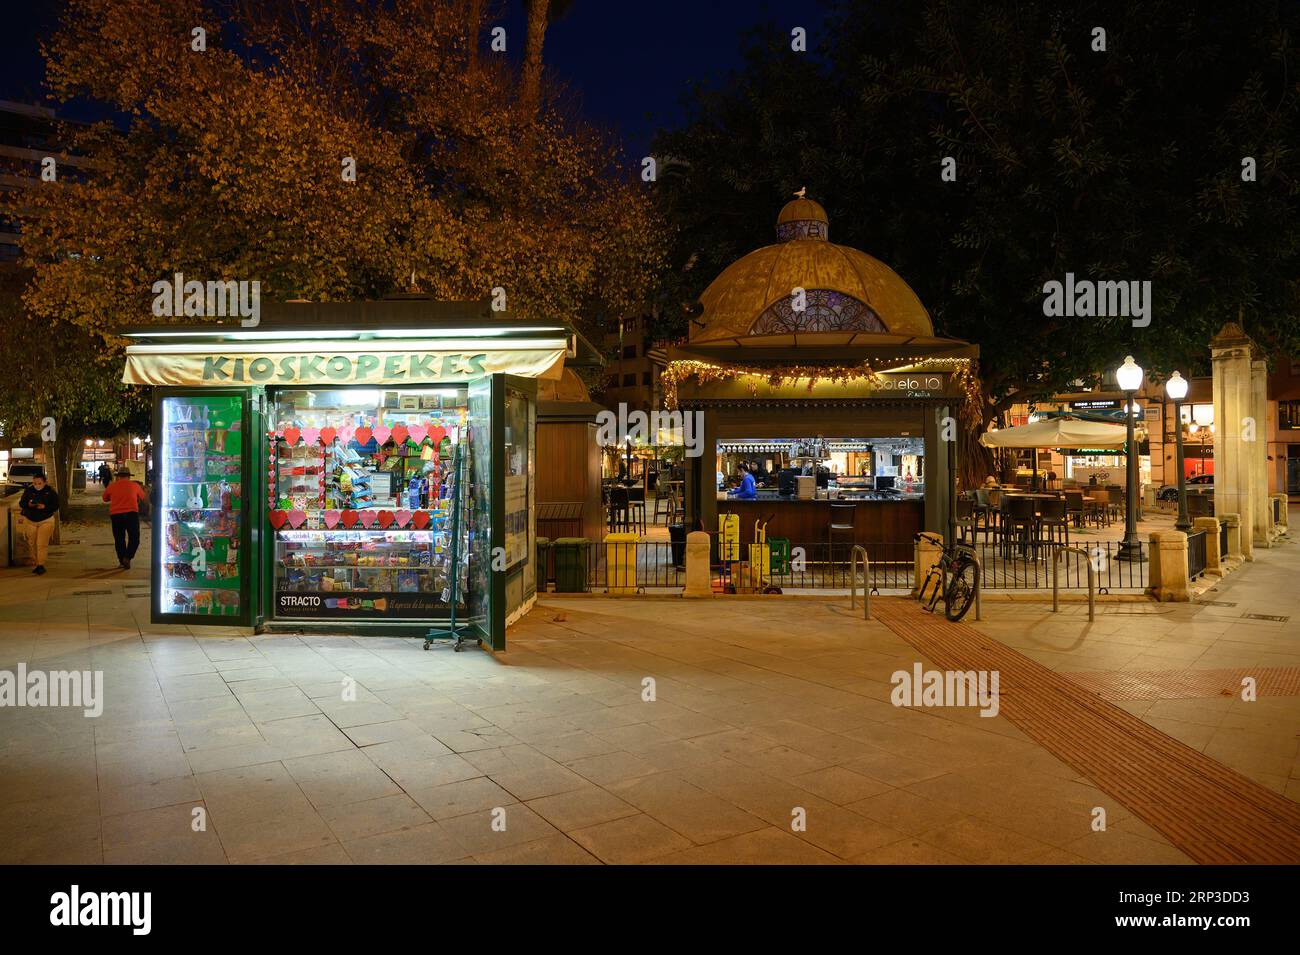 Alicante, Spain, Illuminated small businesses in a public park. To the left, a Kioskopekes and to the right a bar or drinking establishment. Stock Photo